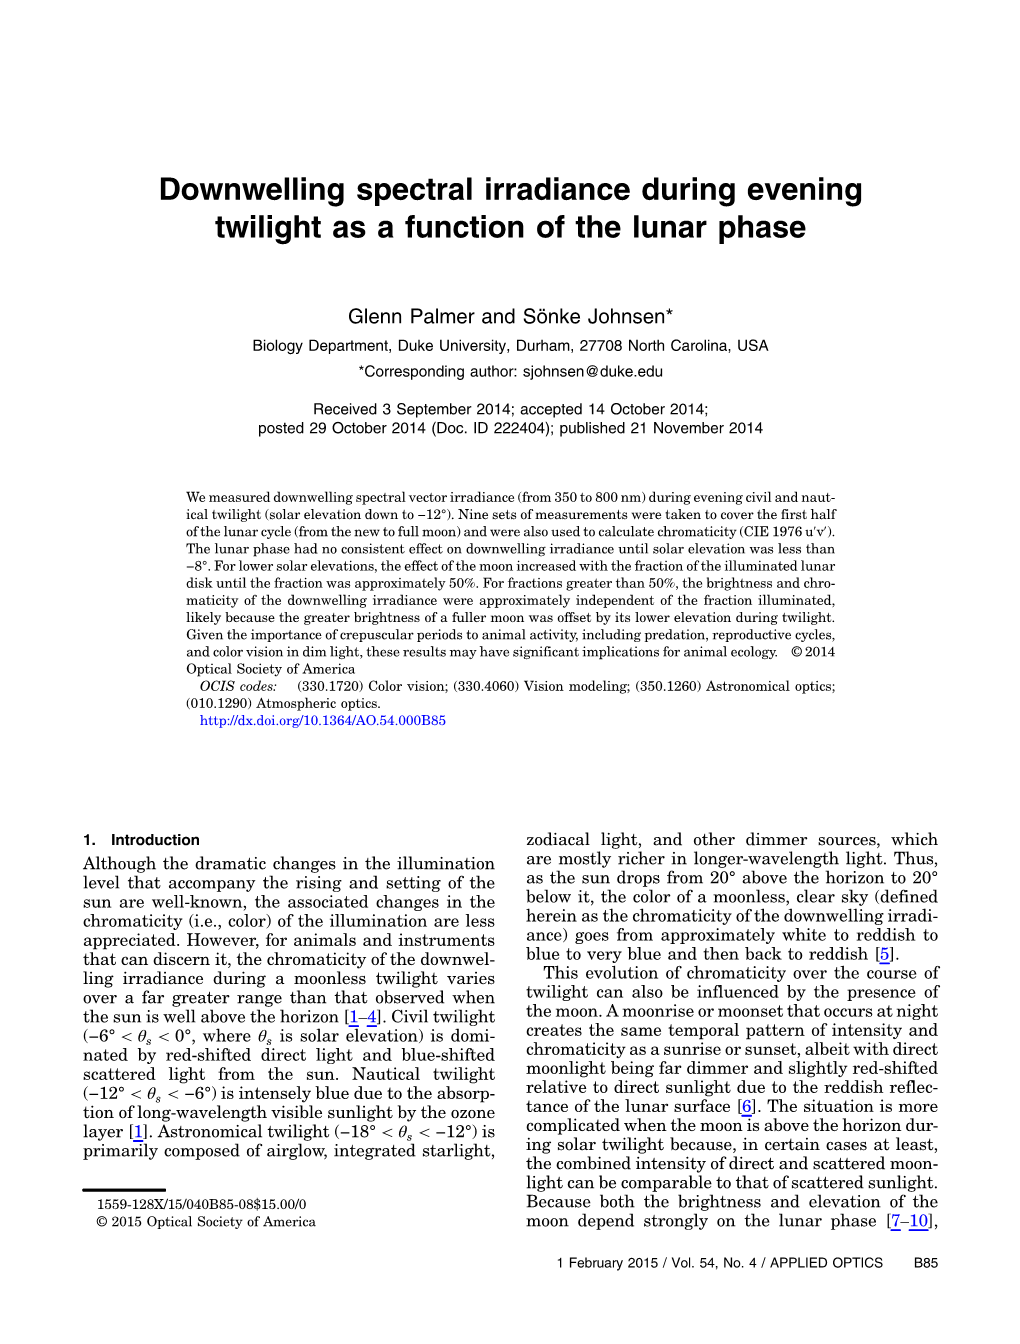 Downwelling Spectral Irradiance During Evening Twilight As a Function of the Lunar Phase